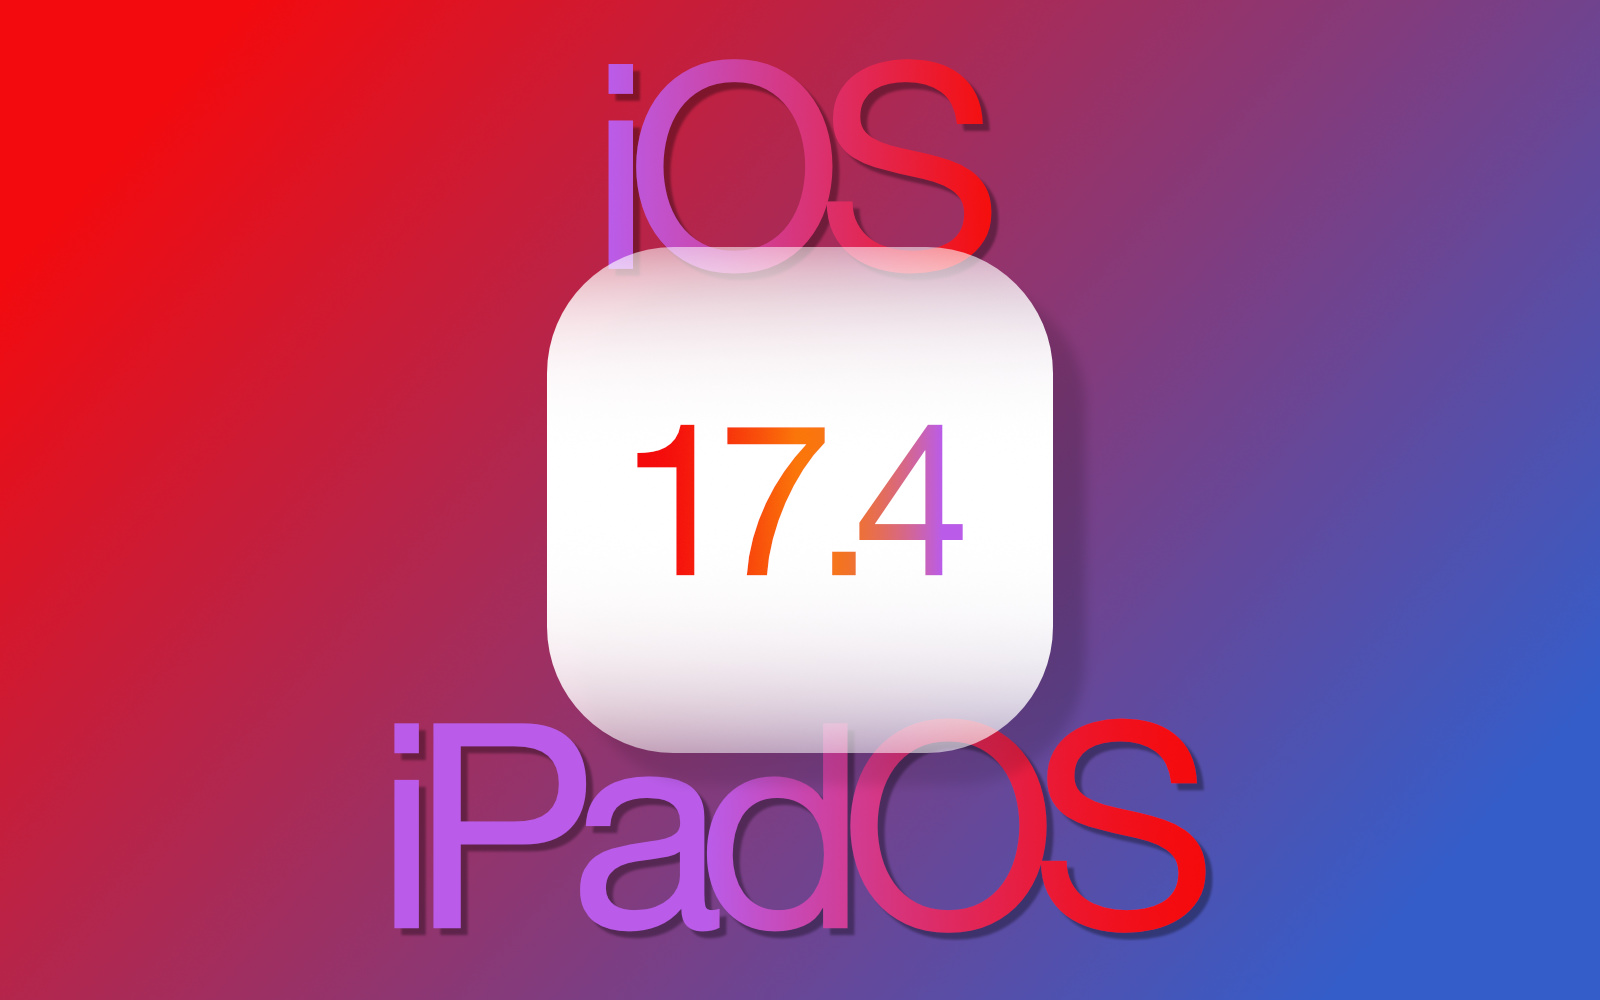 IOS17 4 official release